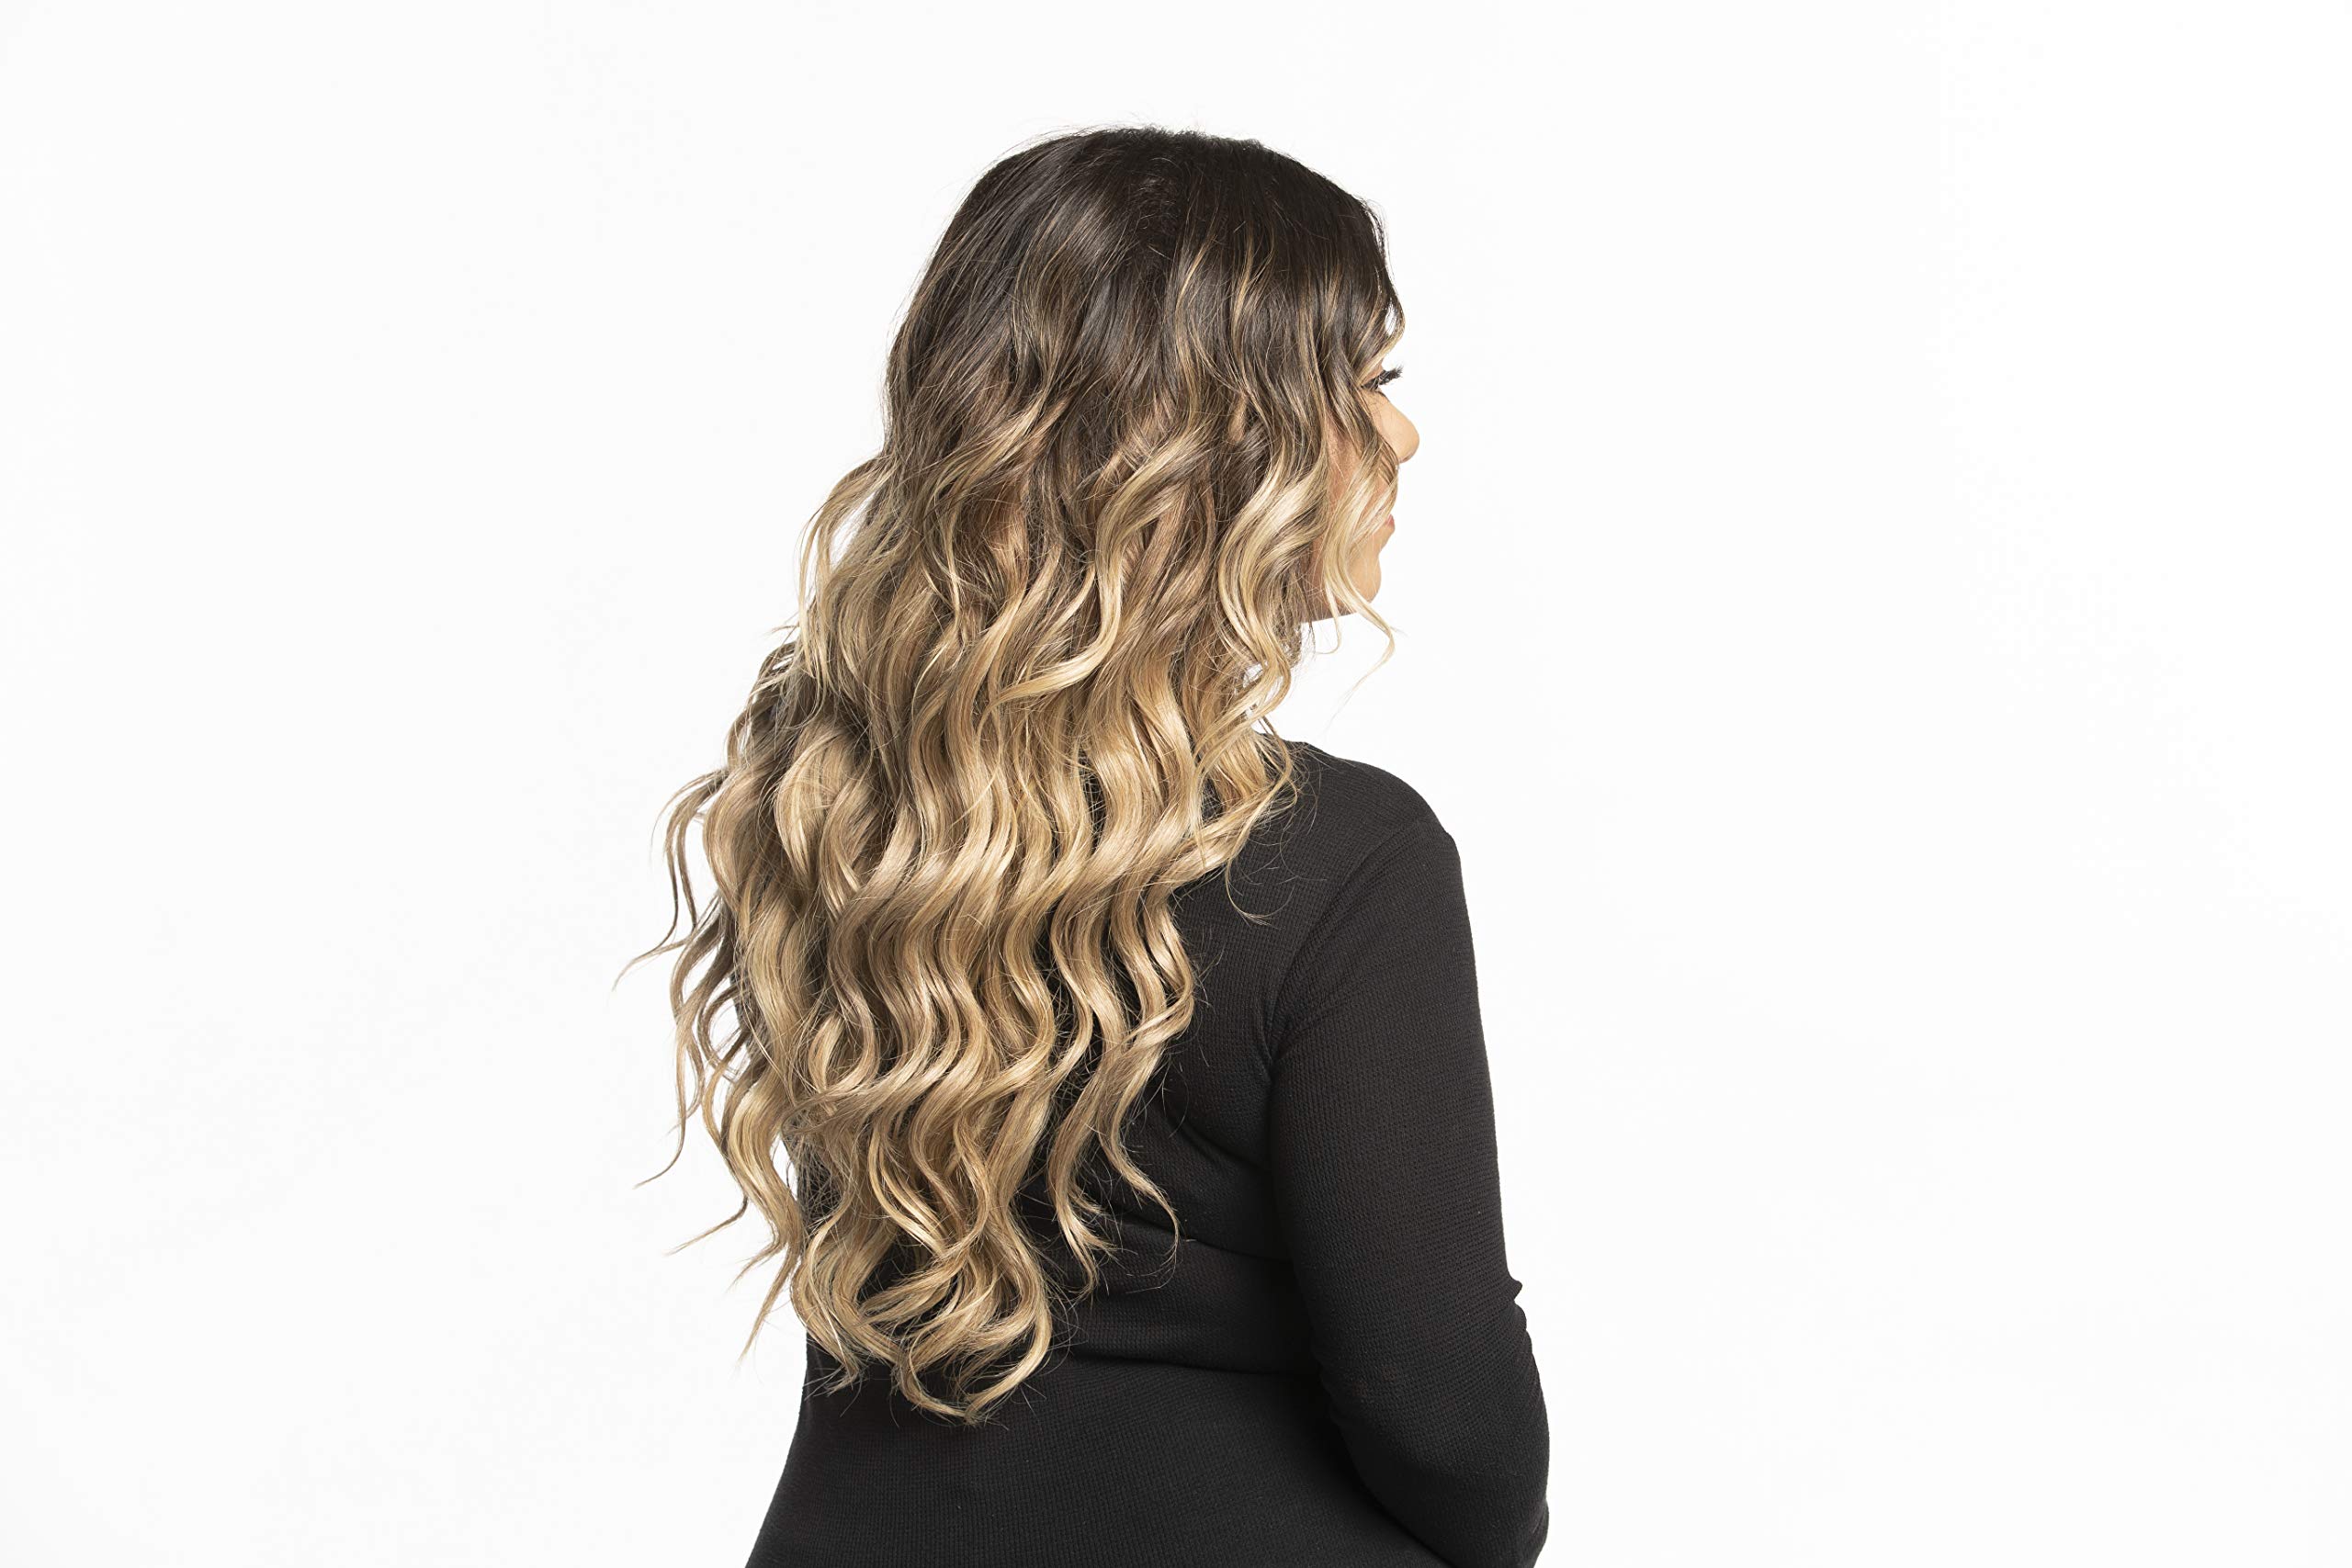 CHI Interchangeable Curling Wand With Inverted Tapered 0.5